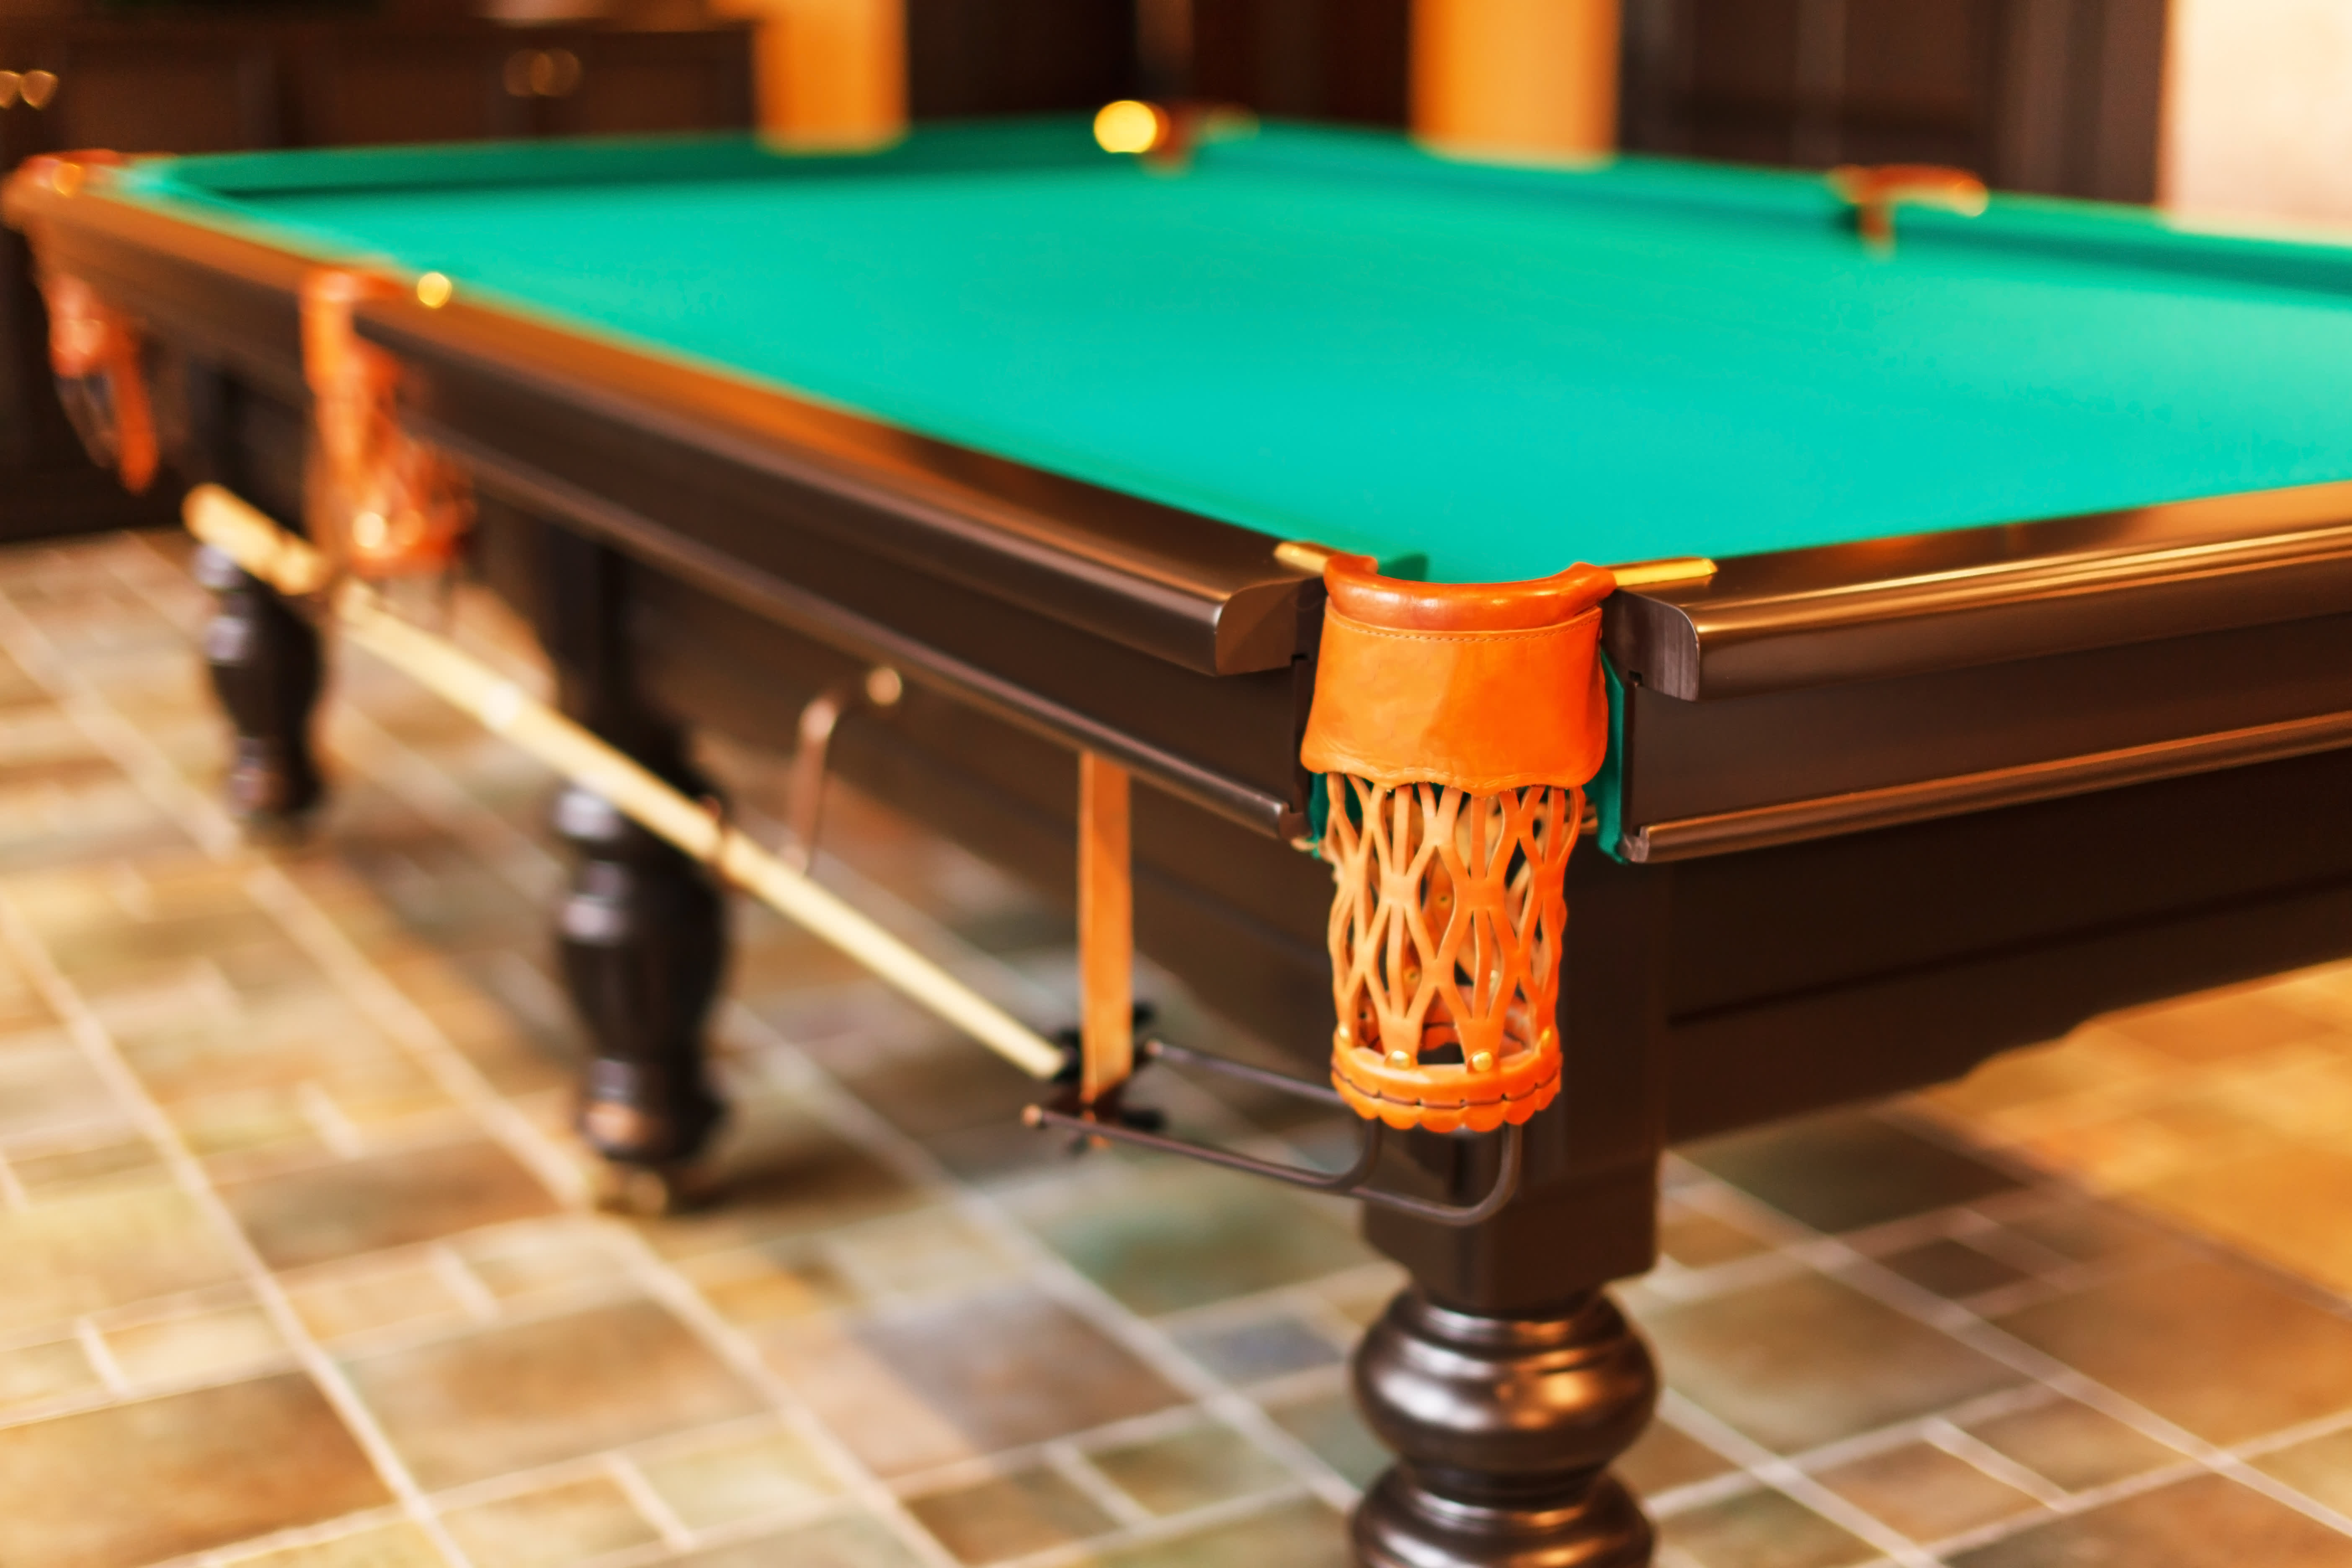 How To Move A Pool Table Safely, According To Pro Movers | Apartment Therapy